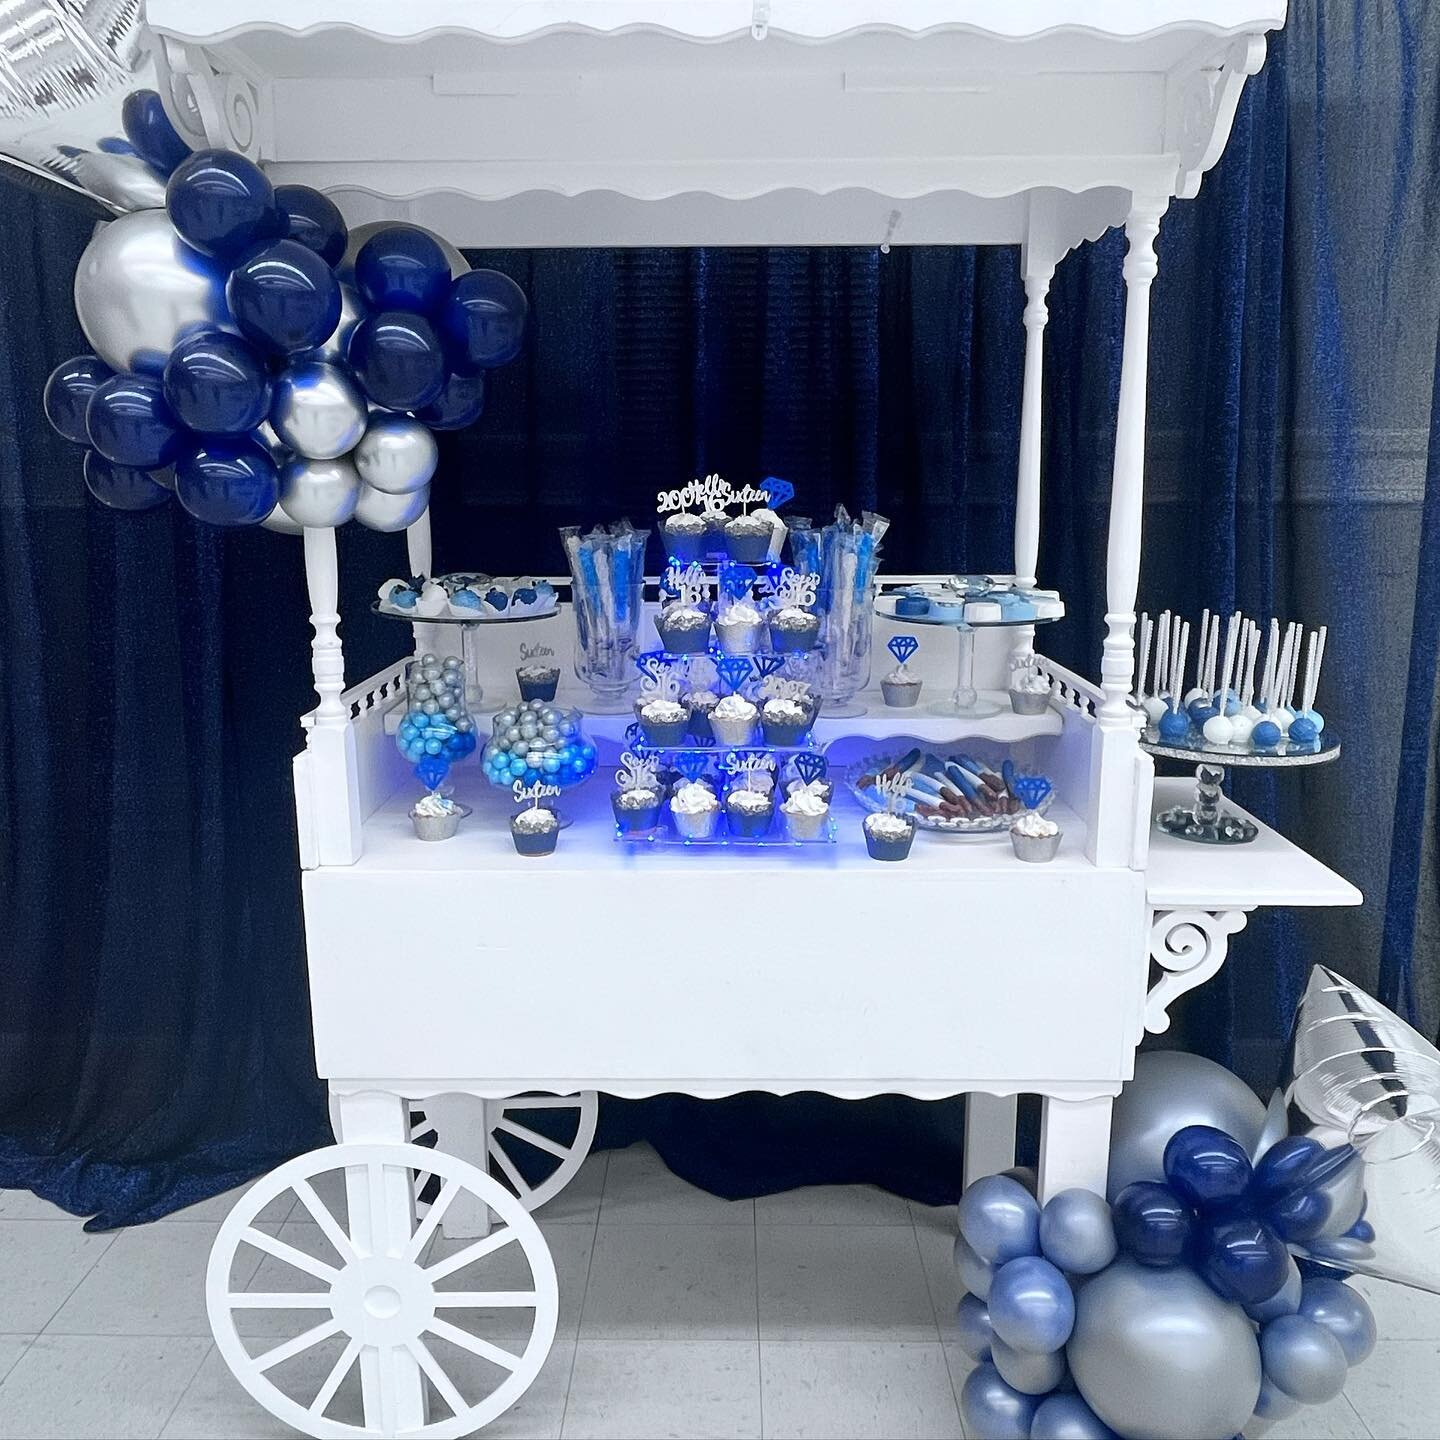 🍭✨ Sweeten your celebrations with our Candy Cart rental! A whimsical addition for all ages.
#denimanddiamonds
#CandyCart #SweetMoments #partyrental #eventdecor #sweetsixteen